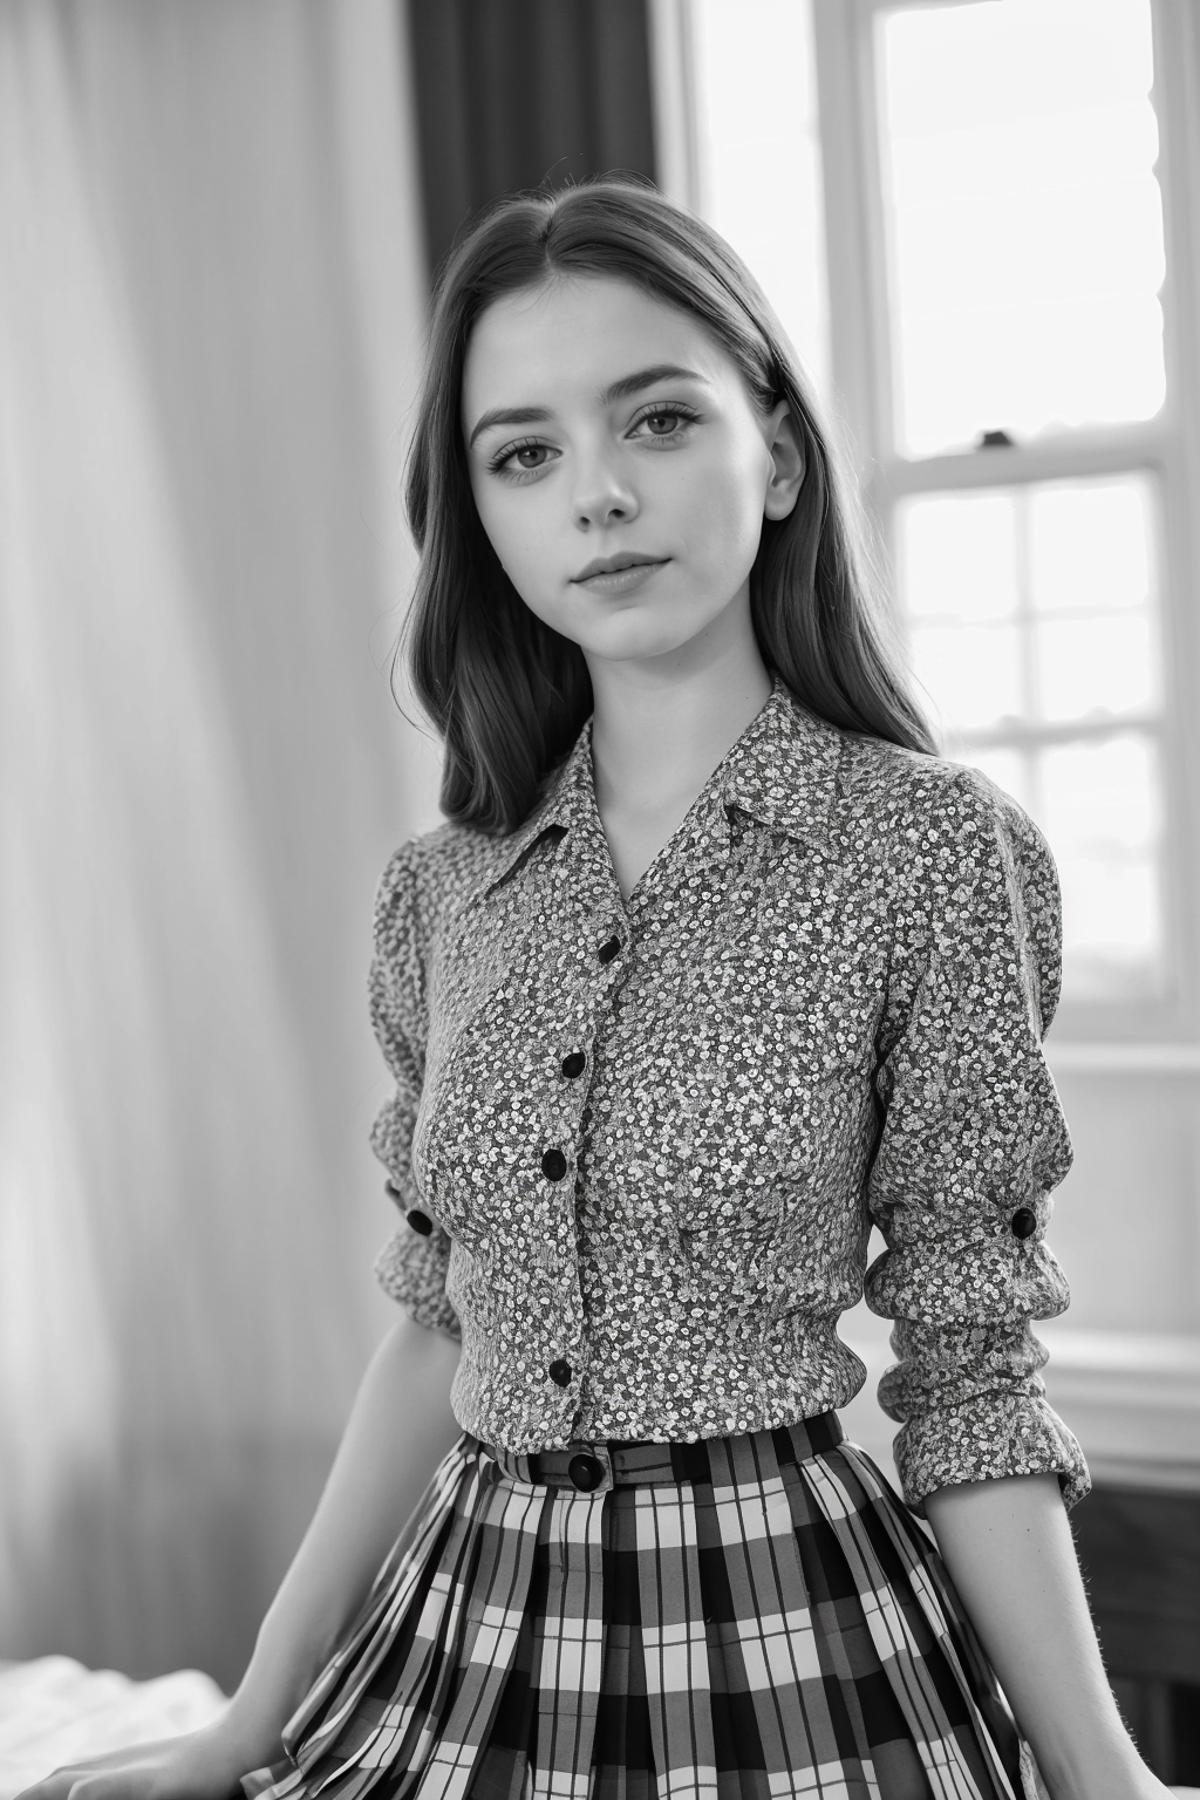 A young woman wearing a plaid skirt and a flowered shirt.